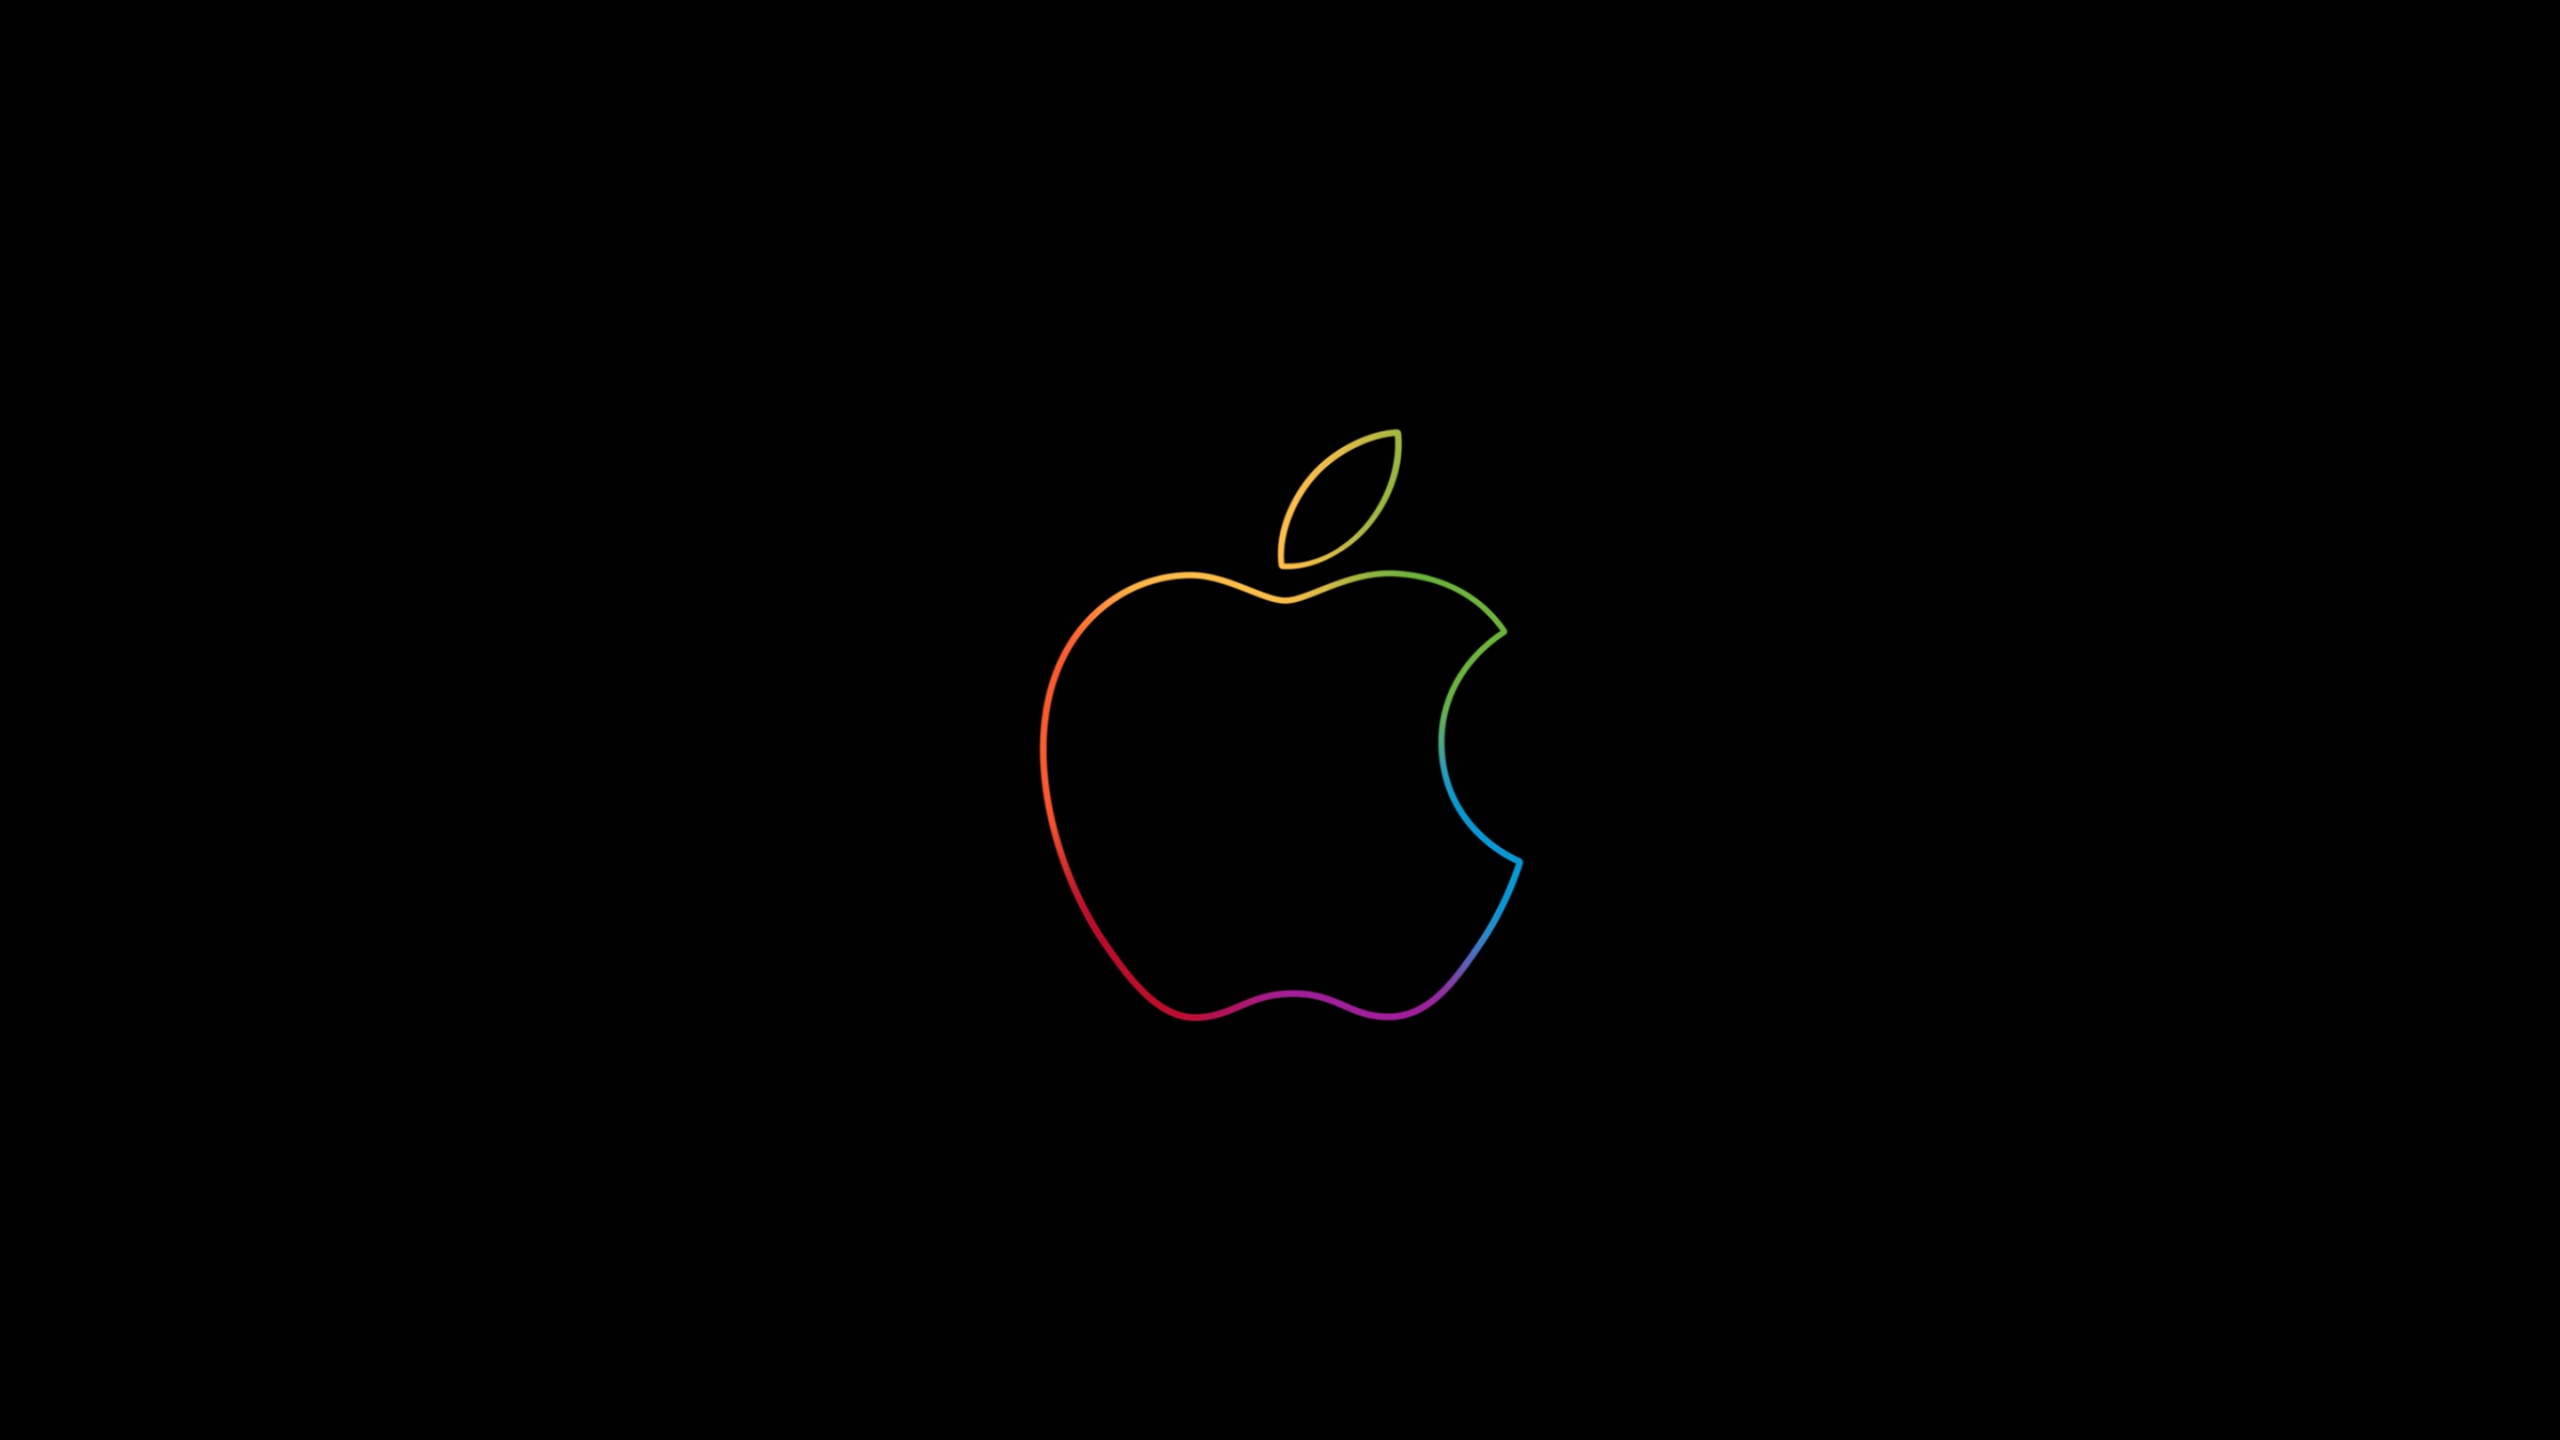 Apple Colorful Logo WallpapersApple Colorful Logo Wallpapers